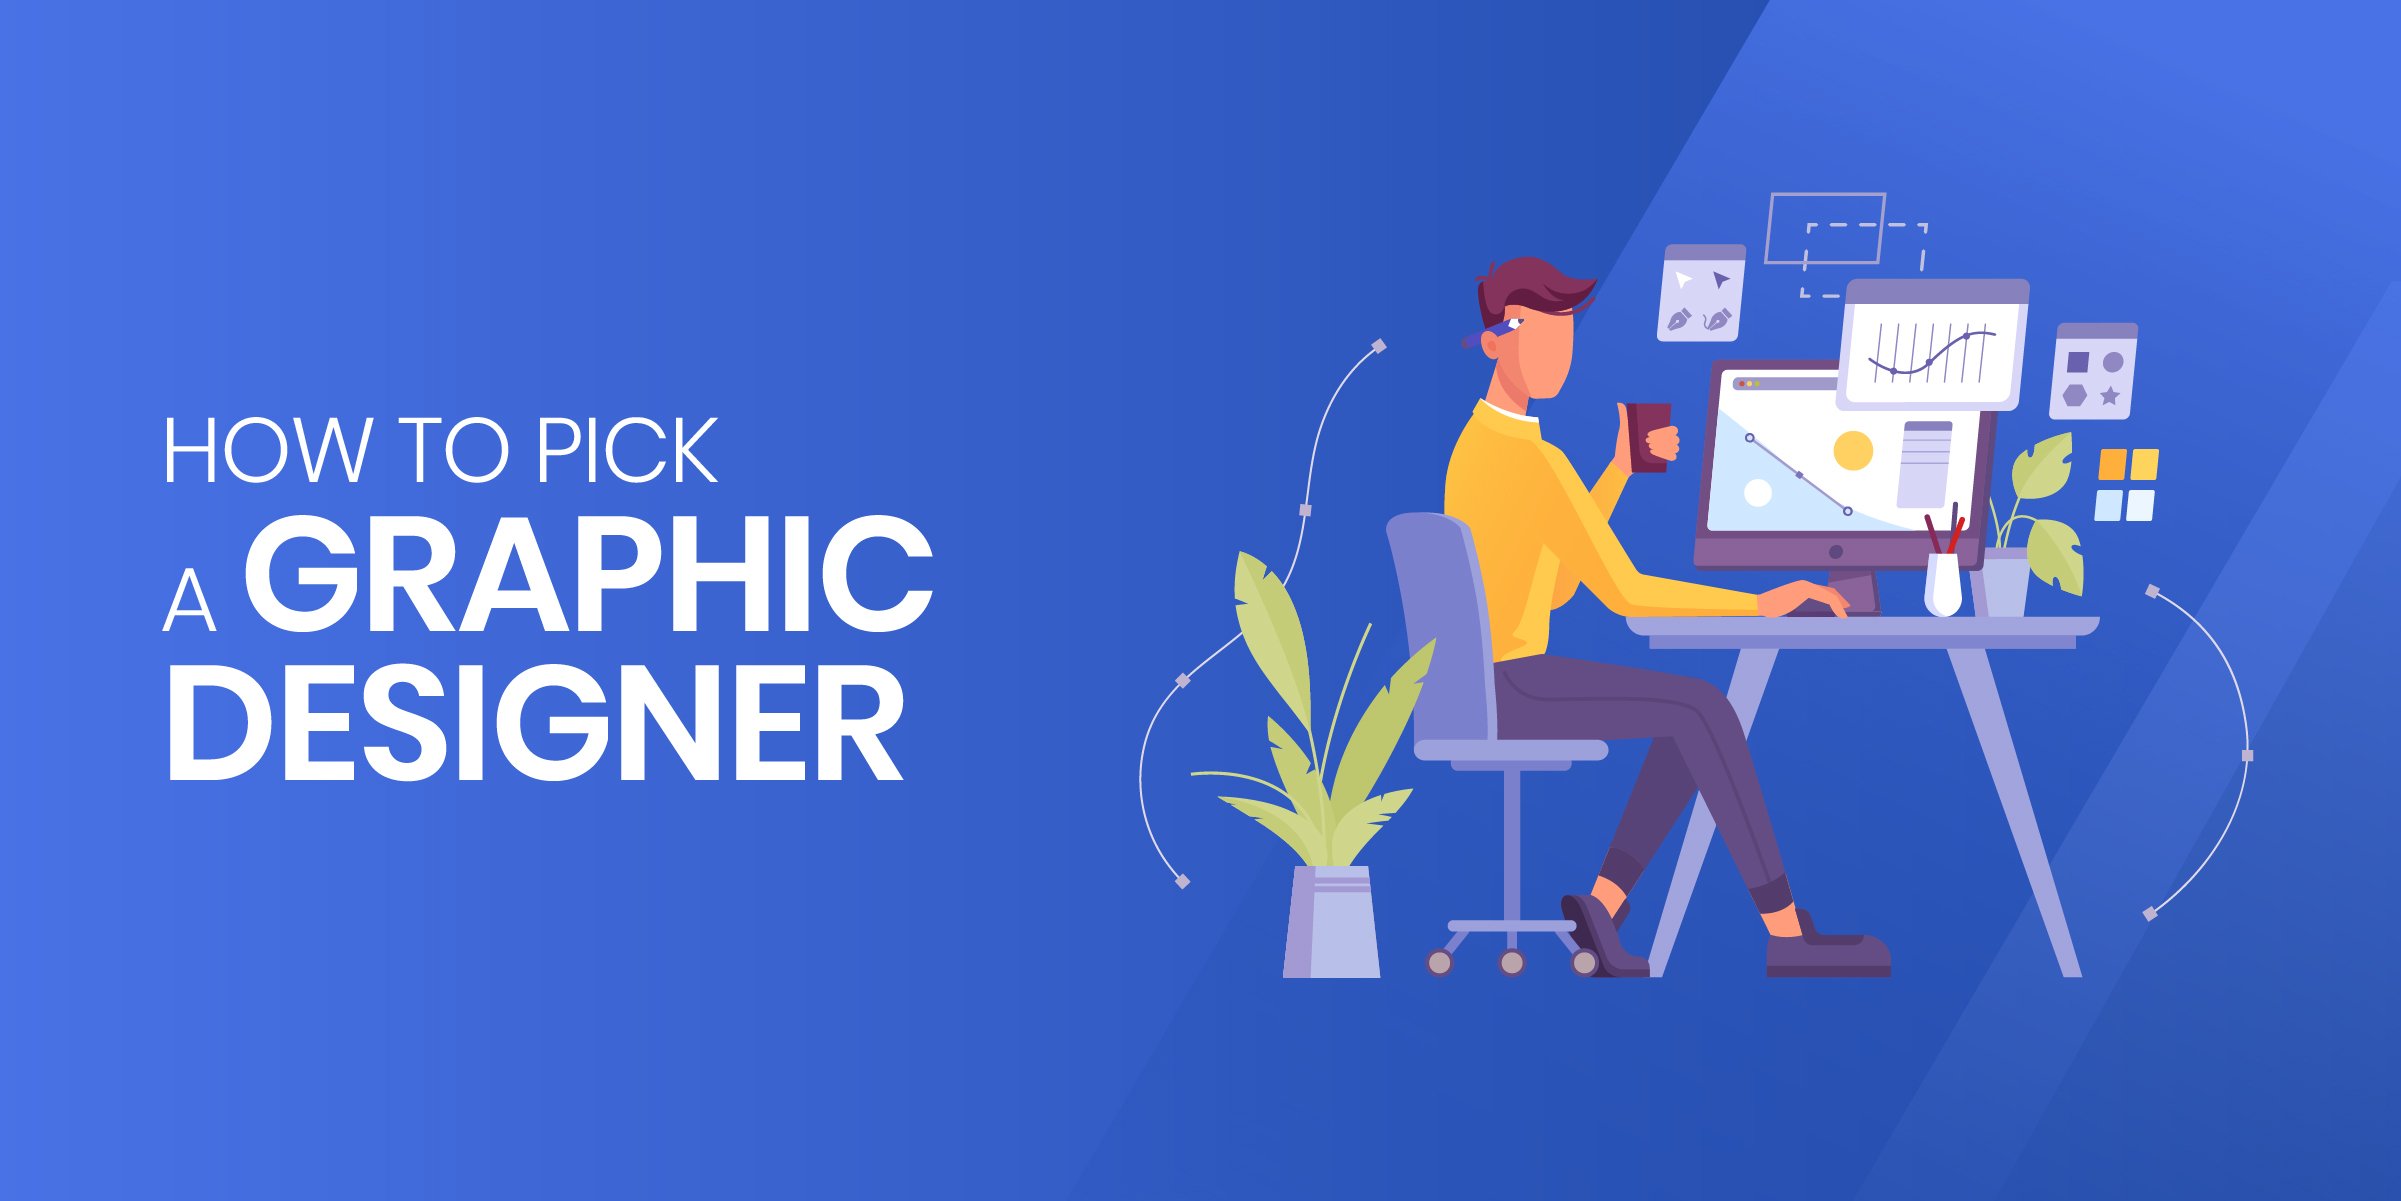 How to Pick a Graphic Designer